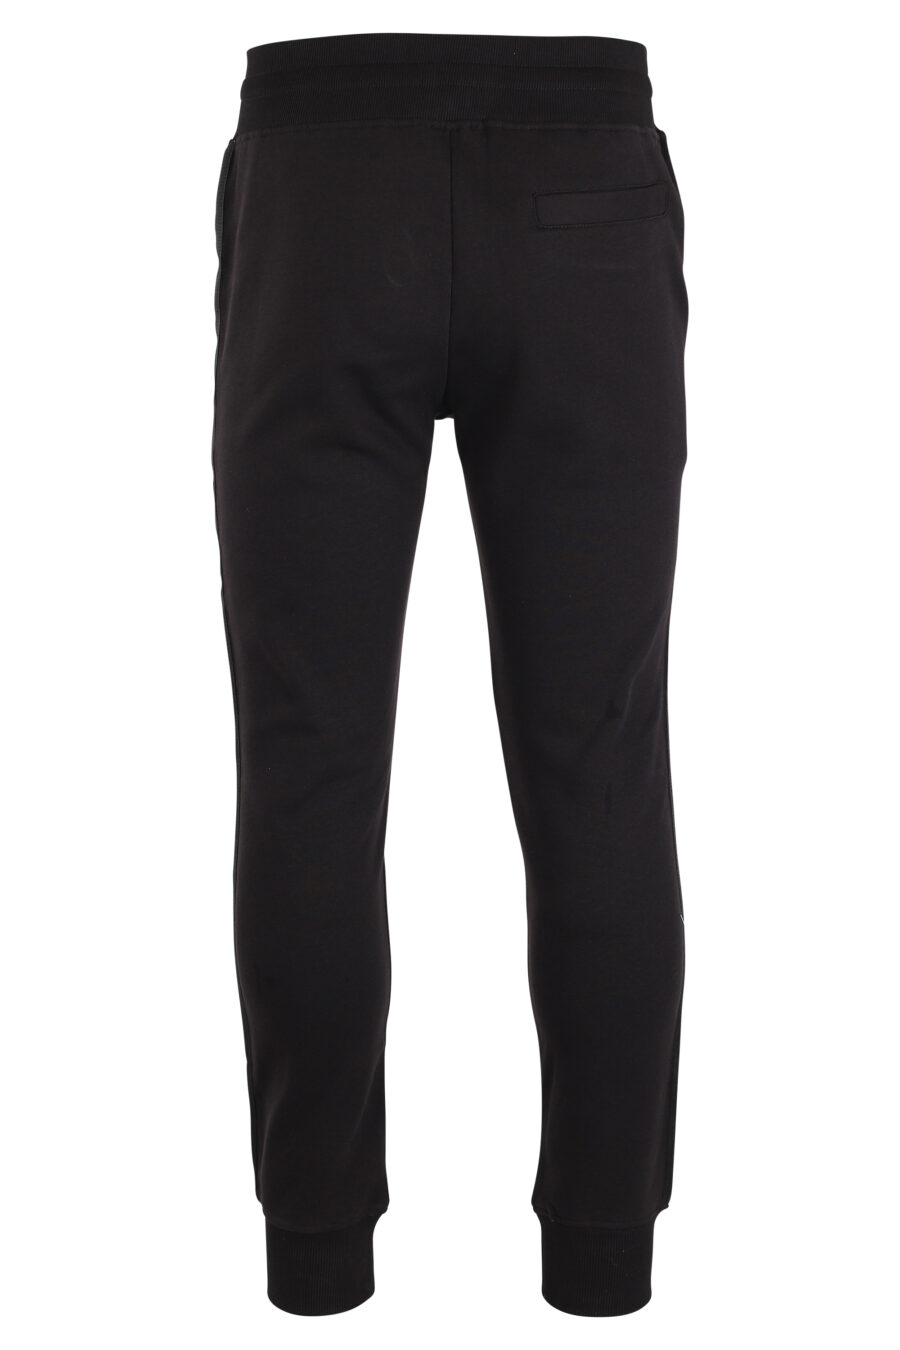 Tracksuit bottoms black with vertical mini logo - IMG 4090